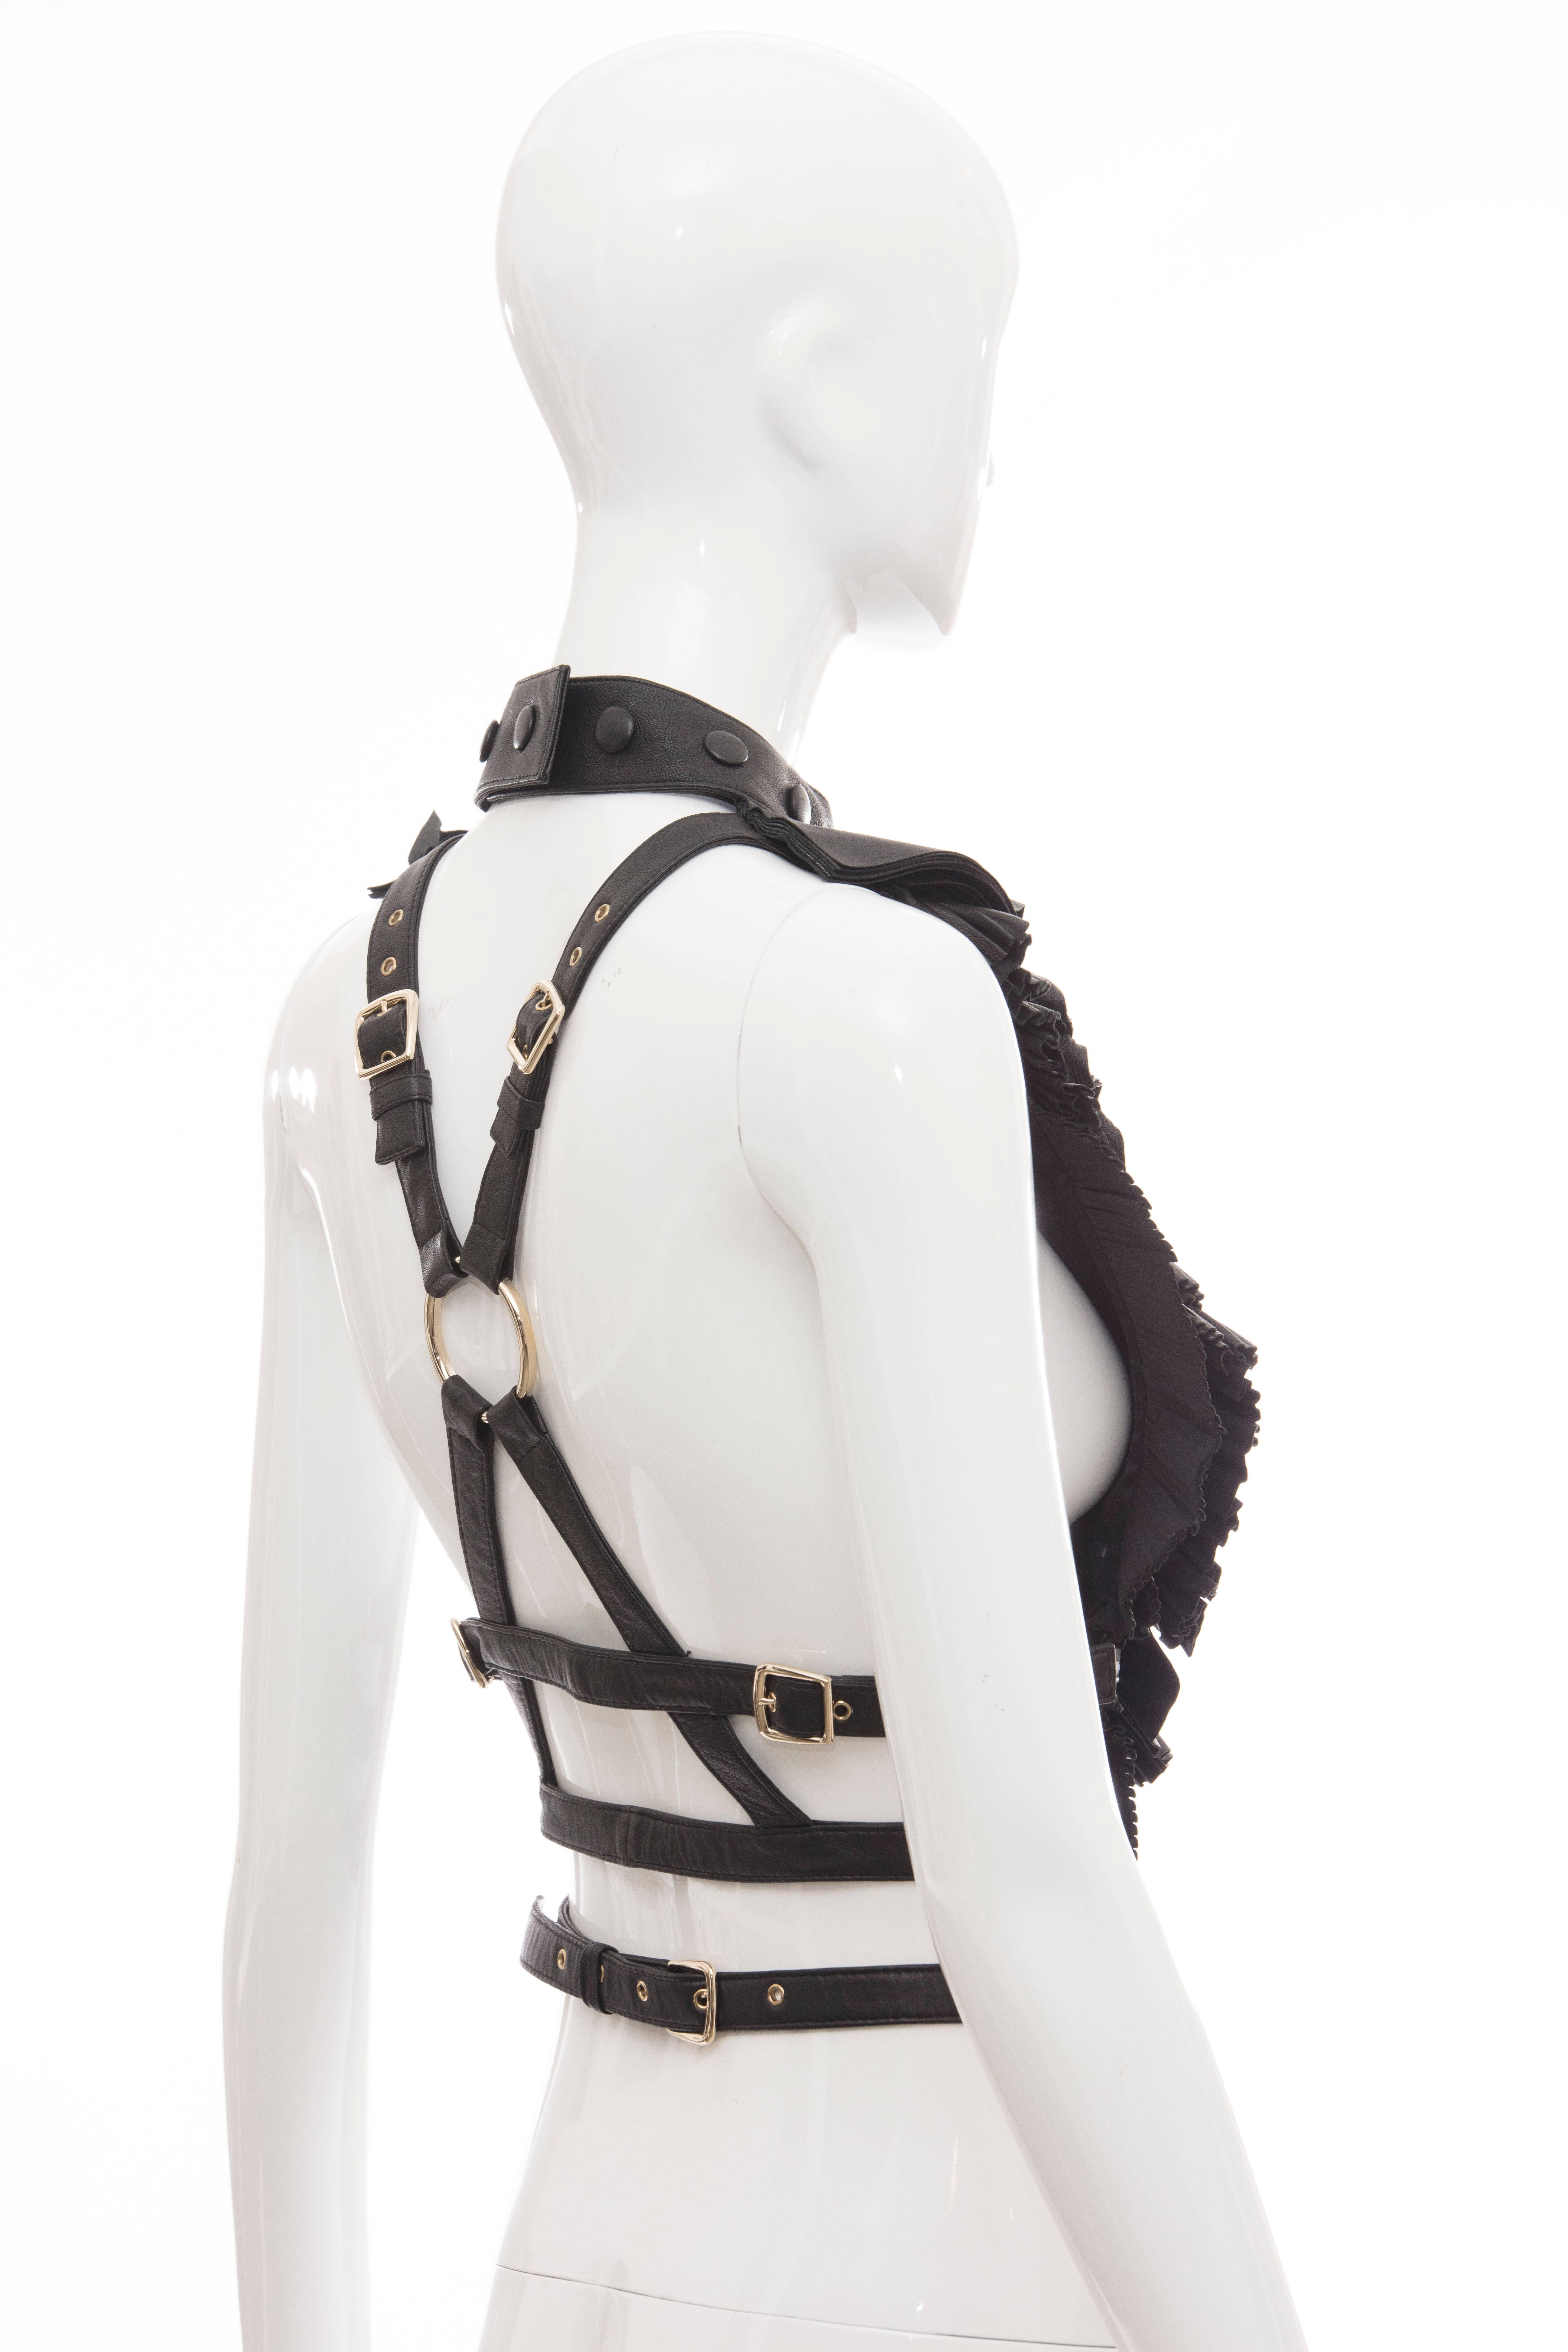 Givenchy by Riccardo Tisci Runway Black Leather Ruffled Harness Top, Spring 2011 2